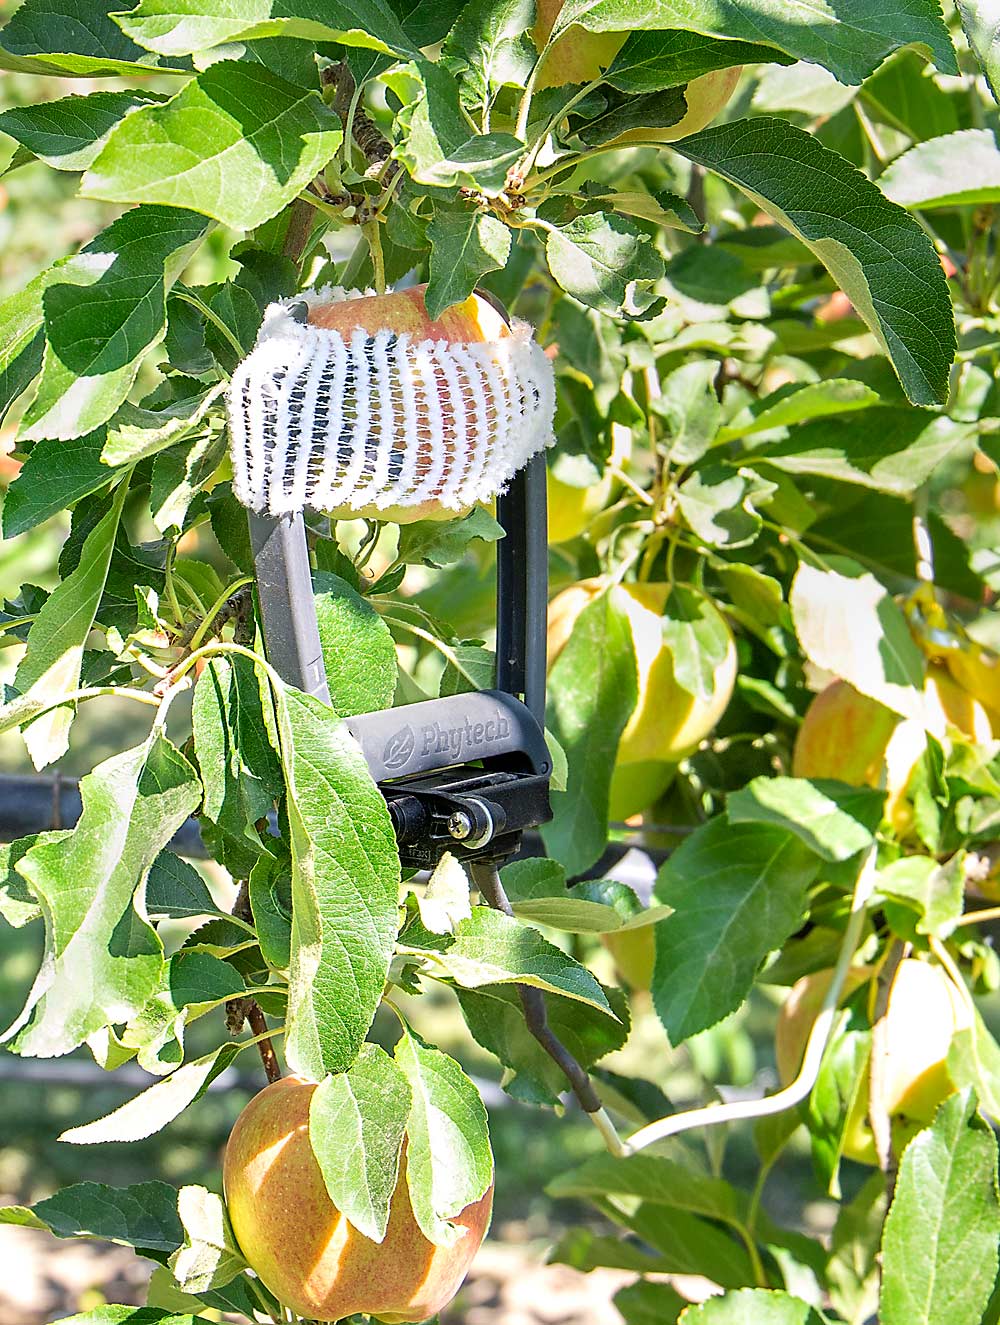 Calipers measure minute growth changes in this Gala apple in Andrew Sundquist’s Yakima-area orchard in Central Washington. It’s part of a technology package that promises to help growers fine-tune irrigation practices to improve fruit quality. (Kate Prengaman/Good Fruit Grower)